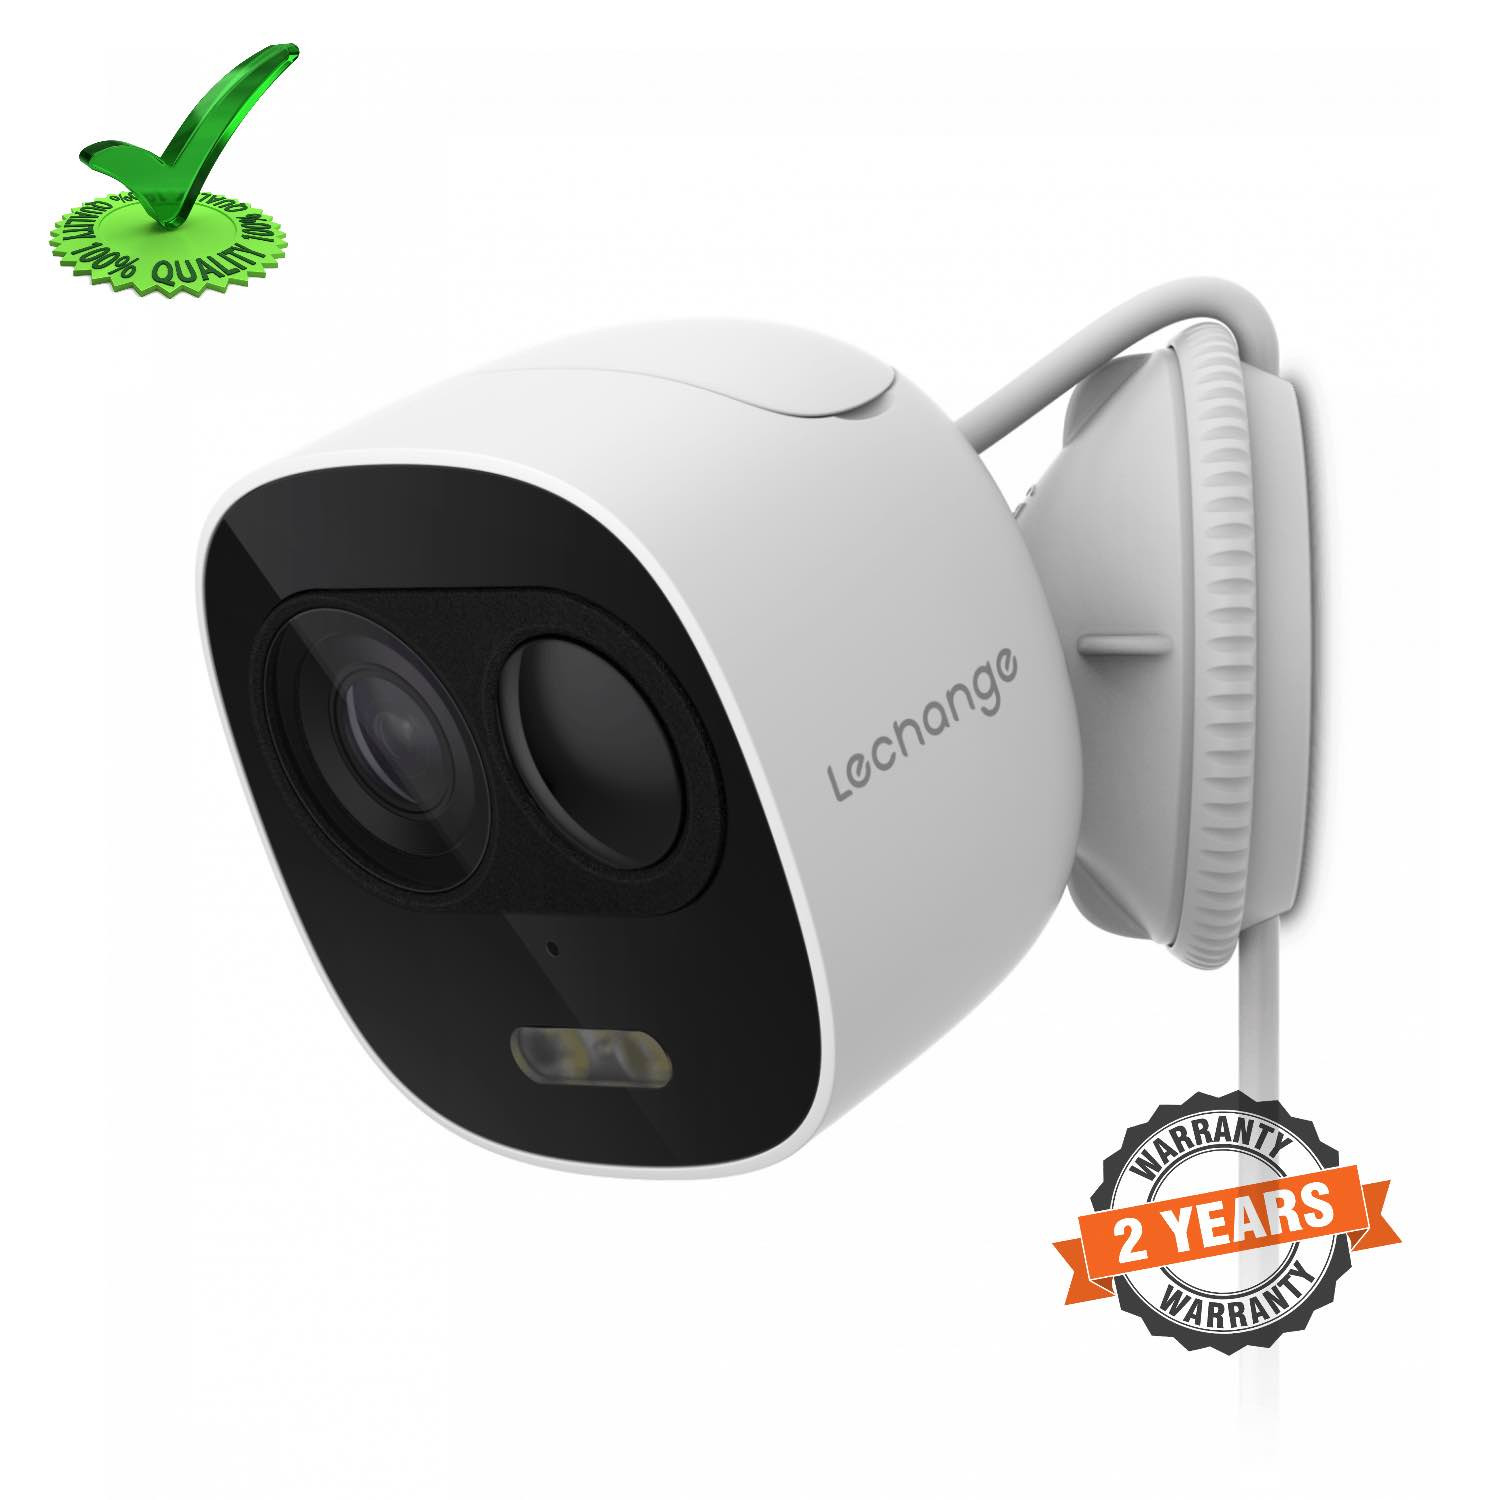 Imou IPC-C26EP LOOC 1080P H.265 Active Deterrence Wi-Fi Camera